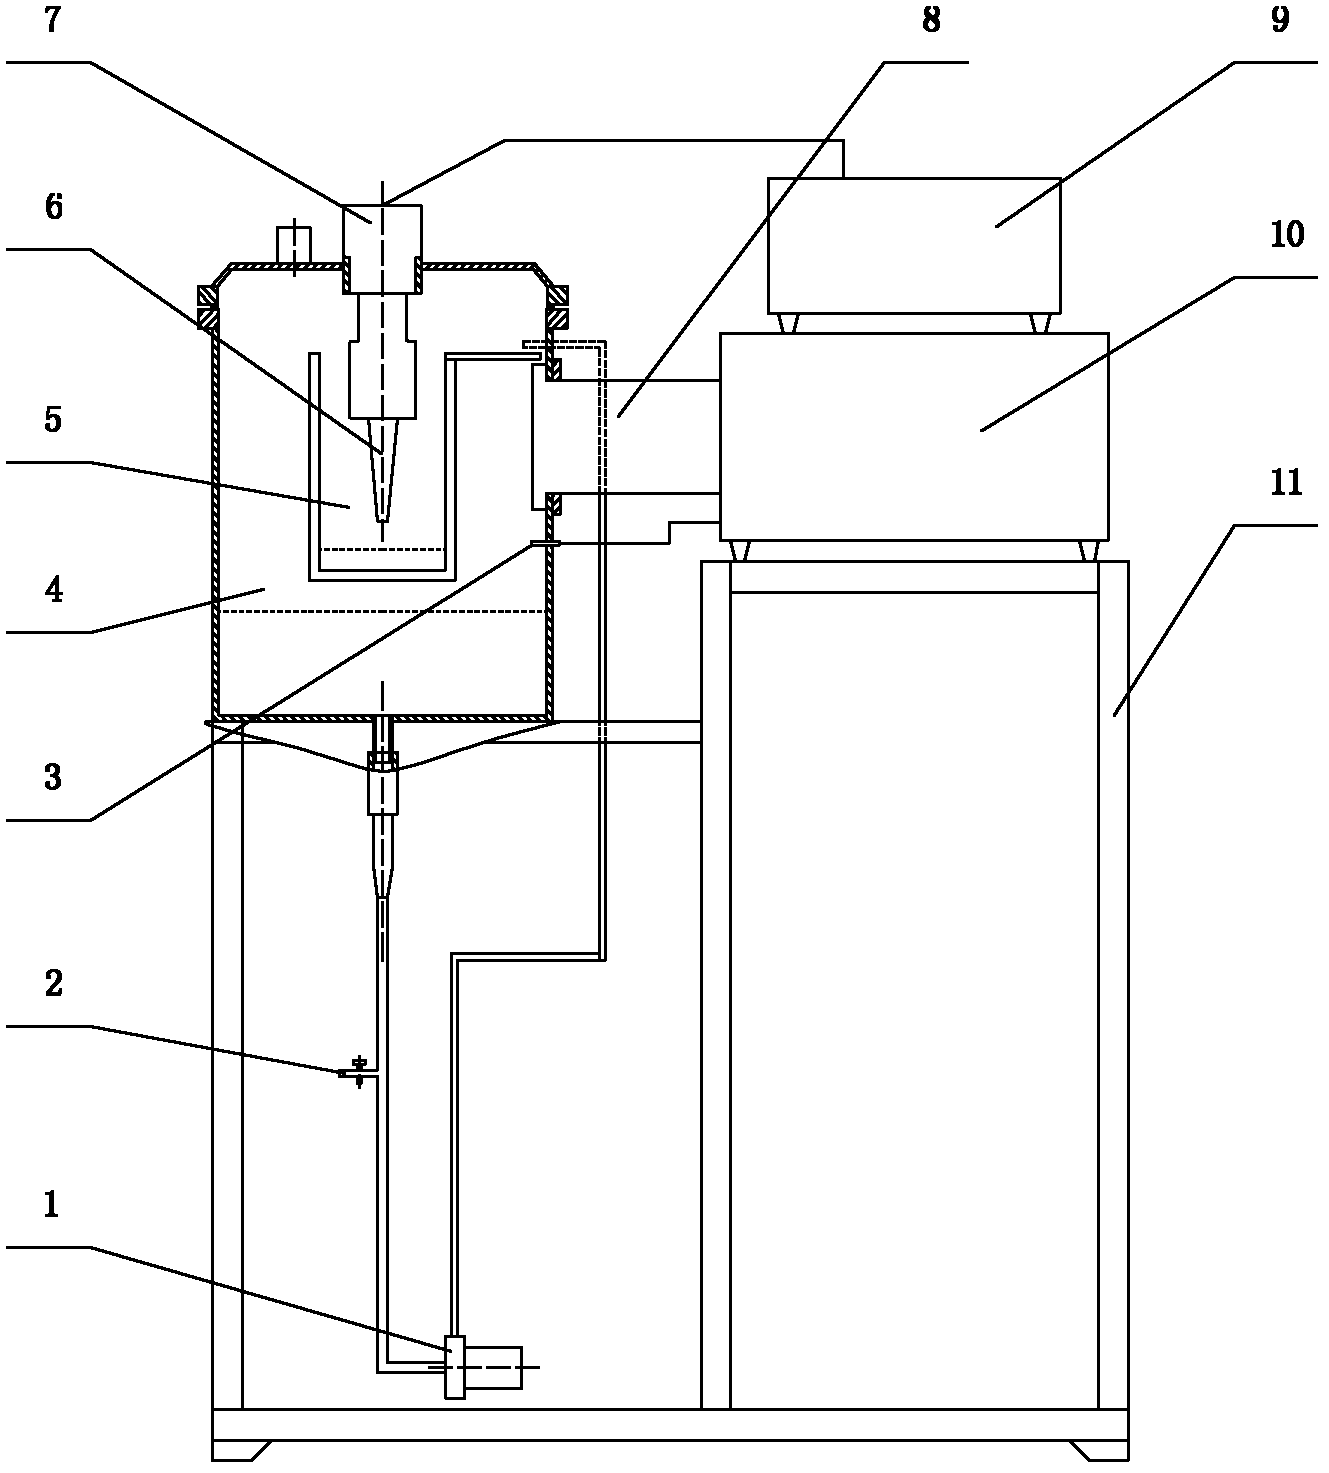 Active constituent extractor for natural substance